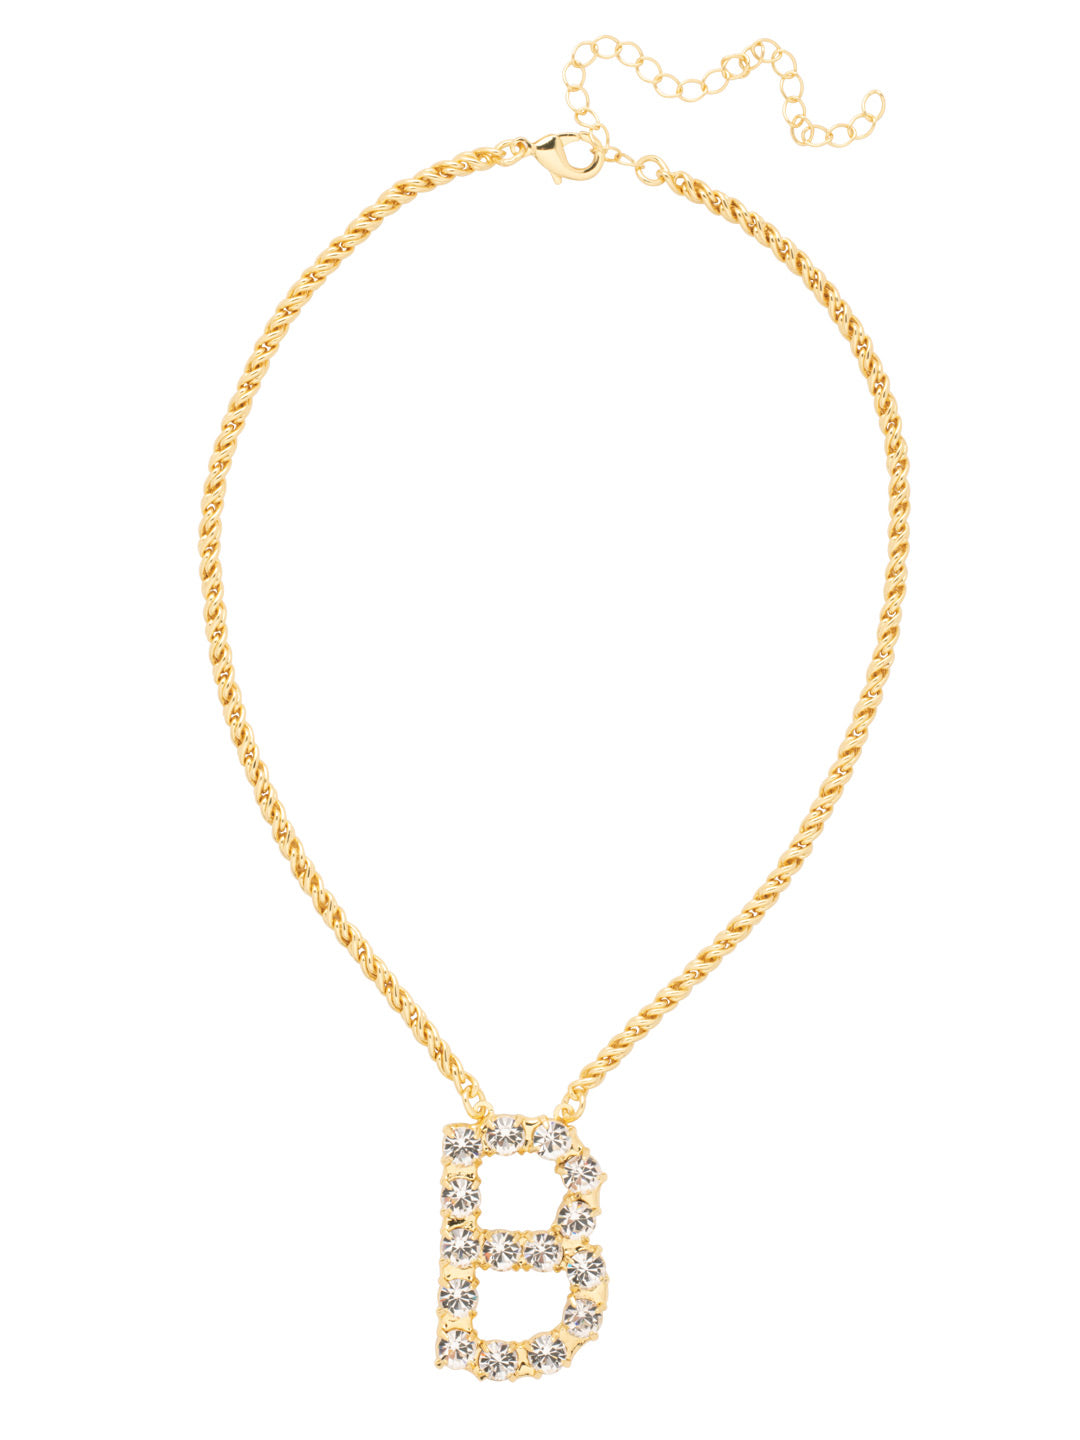 B Initial Rope Pendant Necklace - NFK21BGCRY - <p>The Initial Rope Pendant Necklace features a crystal encrusted metal monogram pendant on an adjustable rope chain, secured with a lobster claw clasp. From Sorrelli's Crystal collection in our Bright Gold-tone finish.</p>